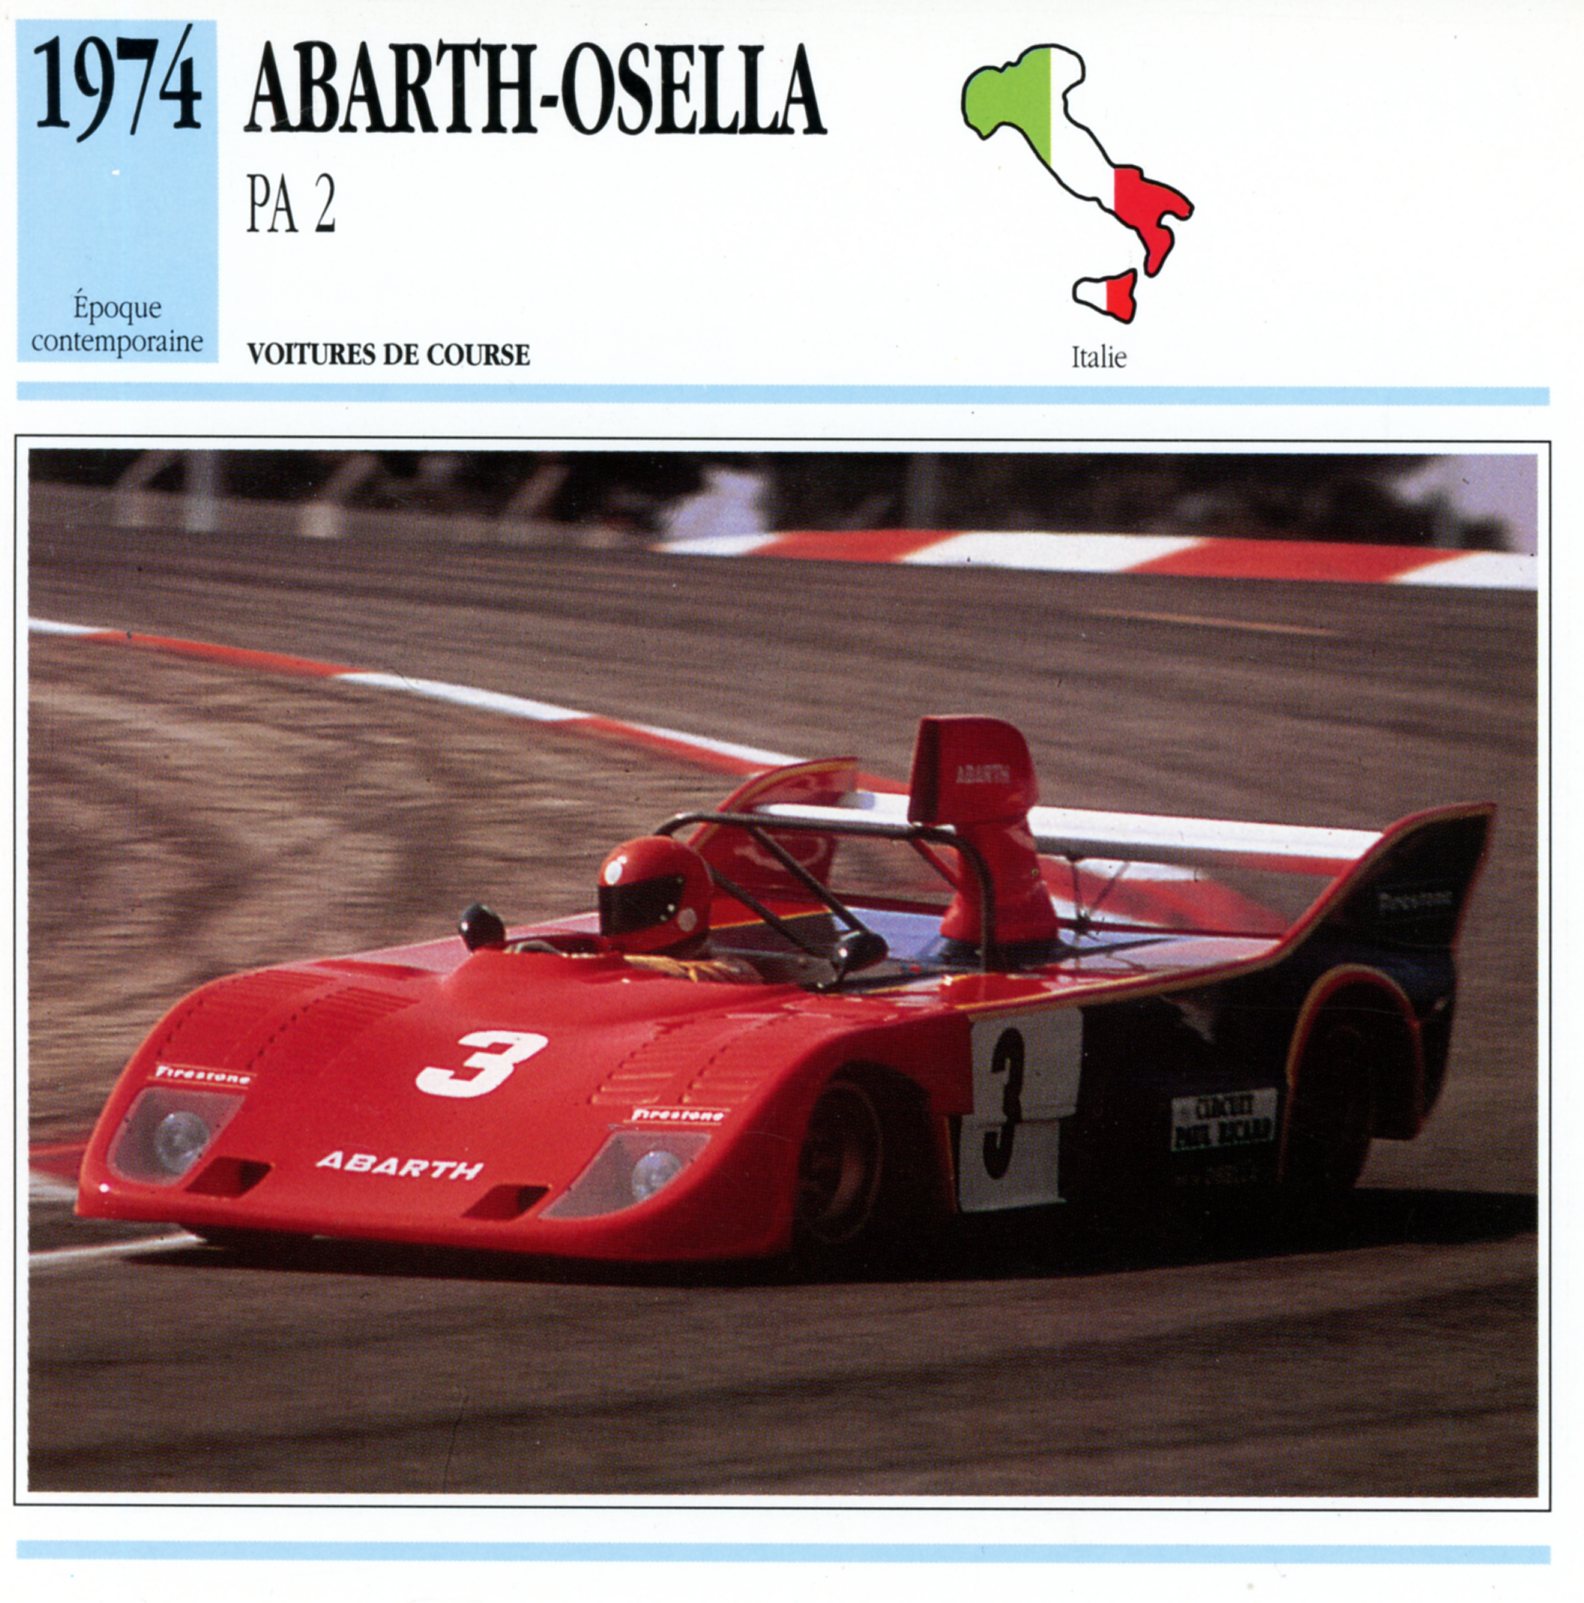 FICHE-AUTO-ABARTH-PA2-1974-LEMASTERBROCKERS-CARS-CARD